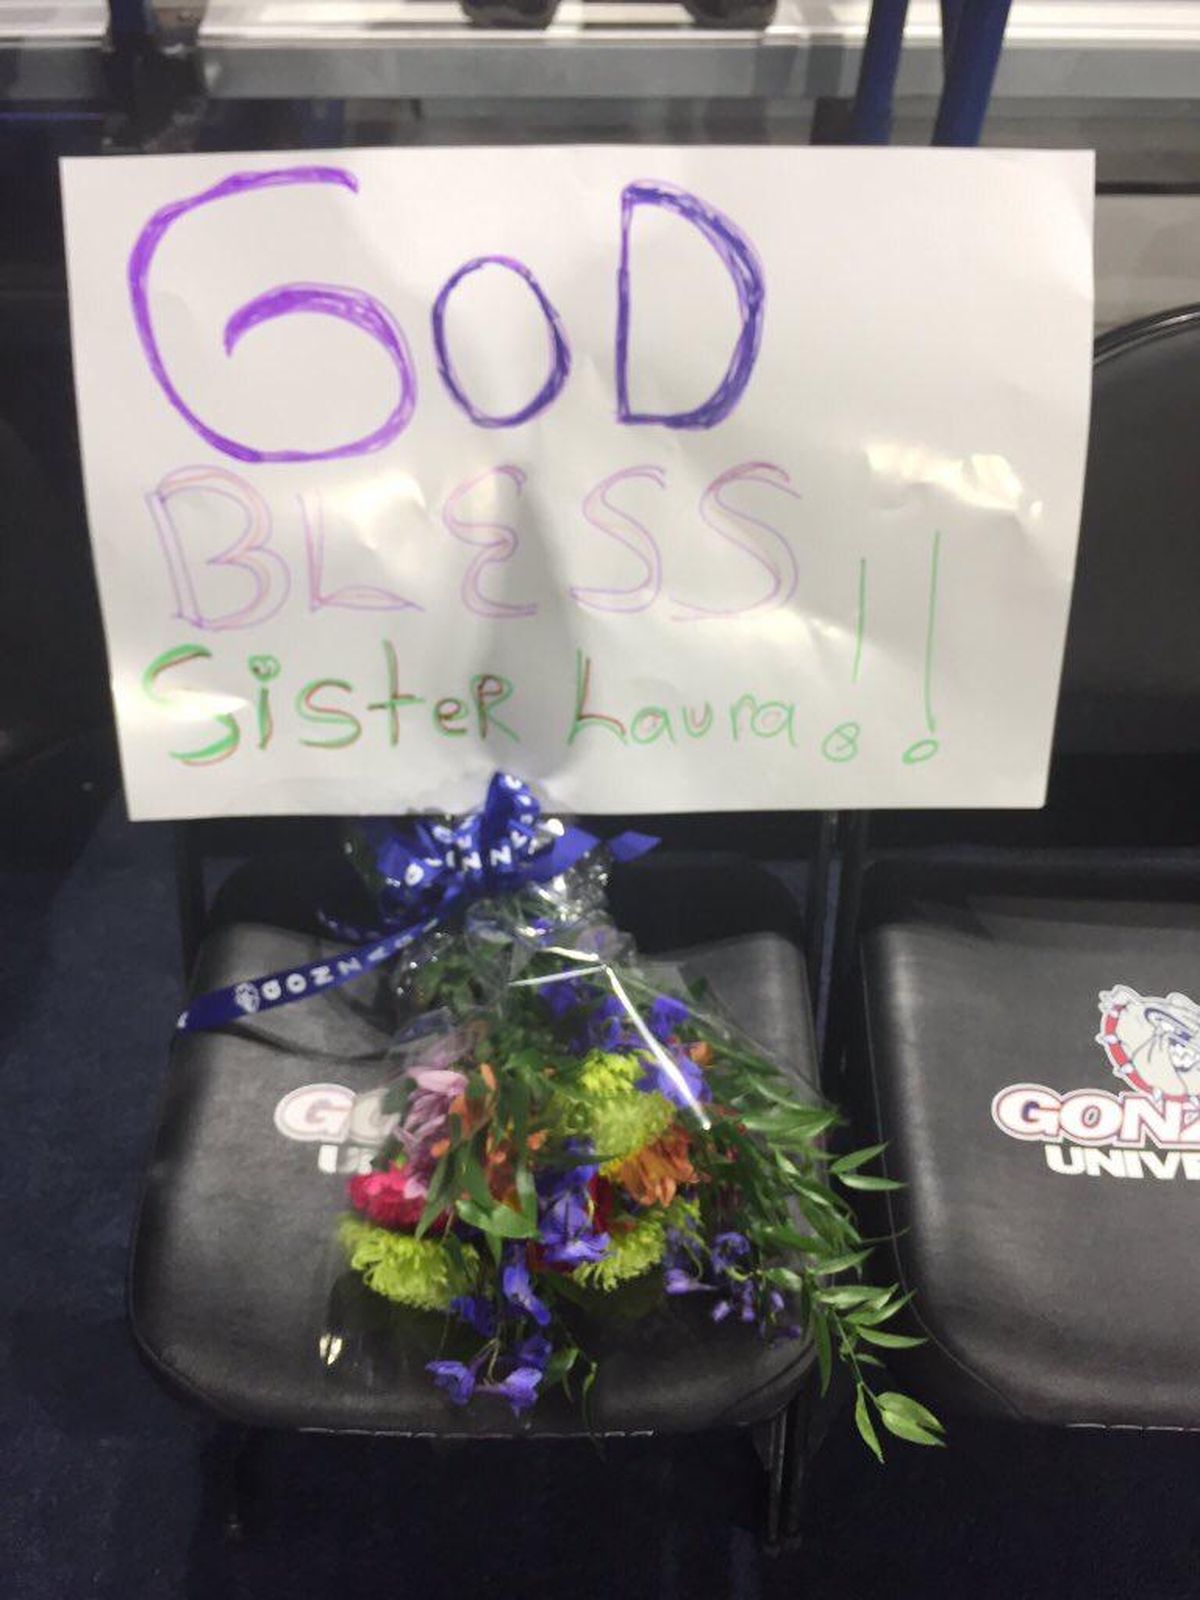 A sign is placed on the Gonzaga University seat of Sister Laura Michel. (Courtesy of Kendra Andrews)